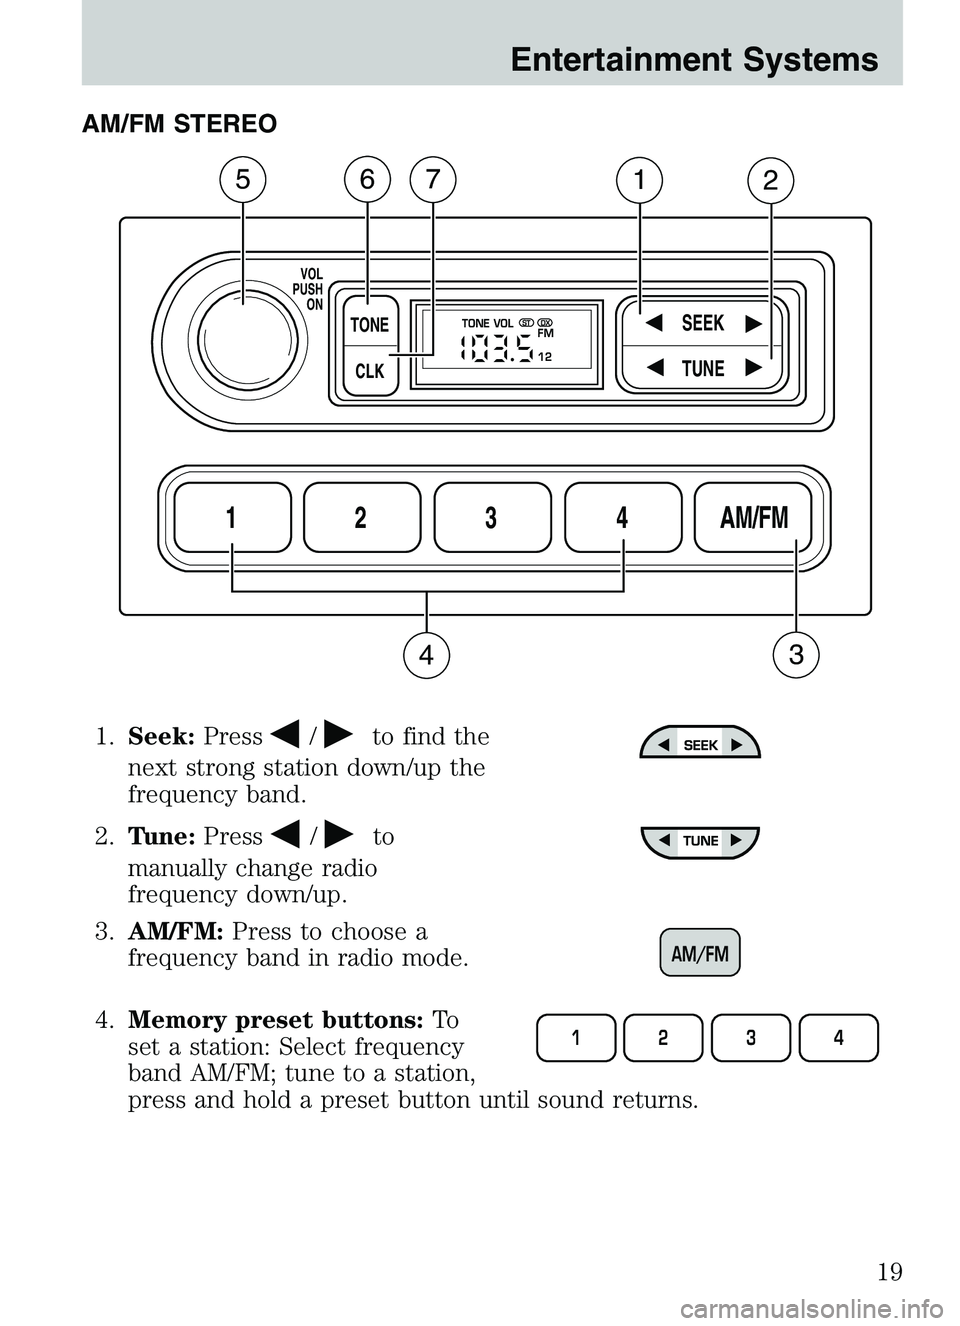 MAZDA MODEL B4000 2003  Owners Manual AM/FM STEREO1. Seek: Press
/to find the
next strong station down/up the
frequency band.
2. Tune: Press
/to
manually change radio
frequency down/up.
3. AM/FM: Press to choose a
frequency band in radio 